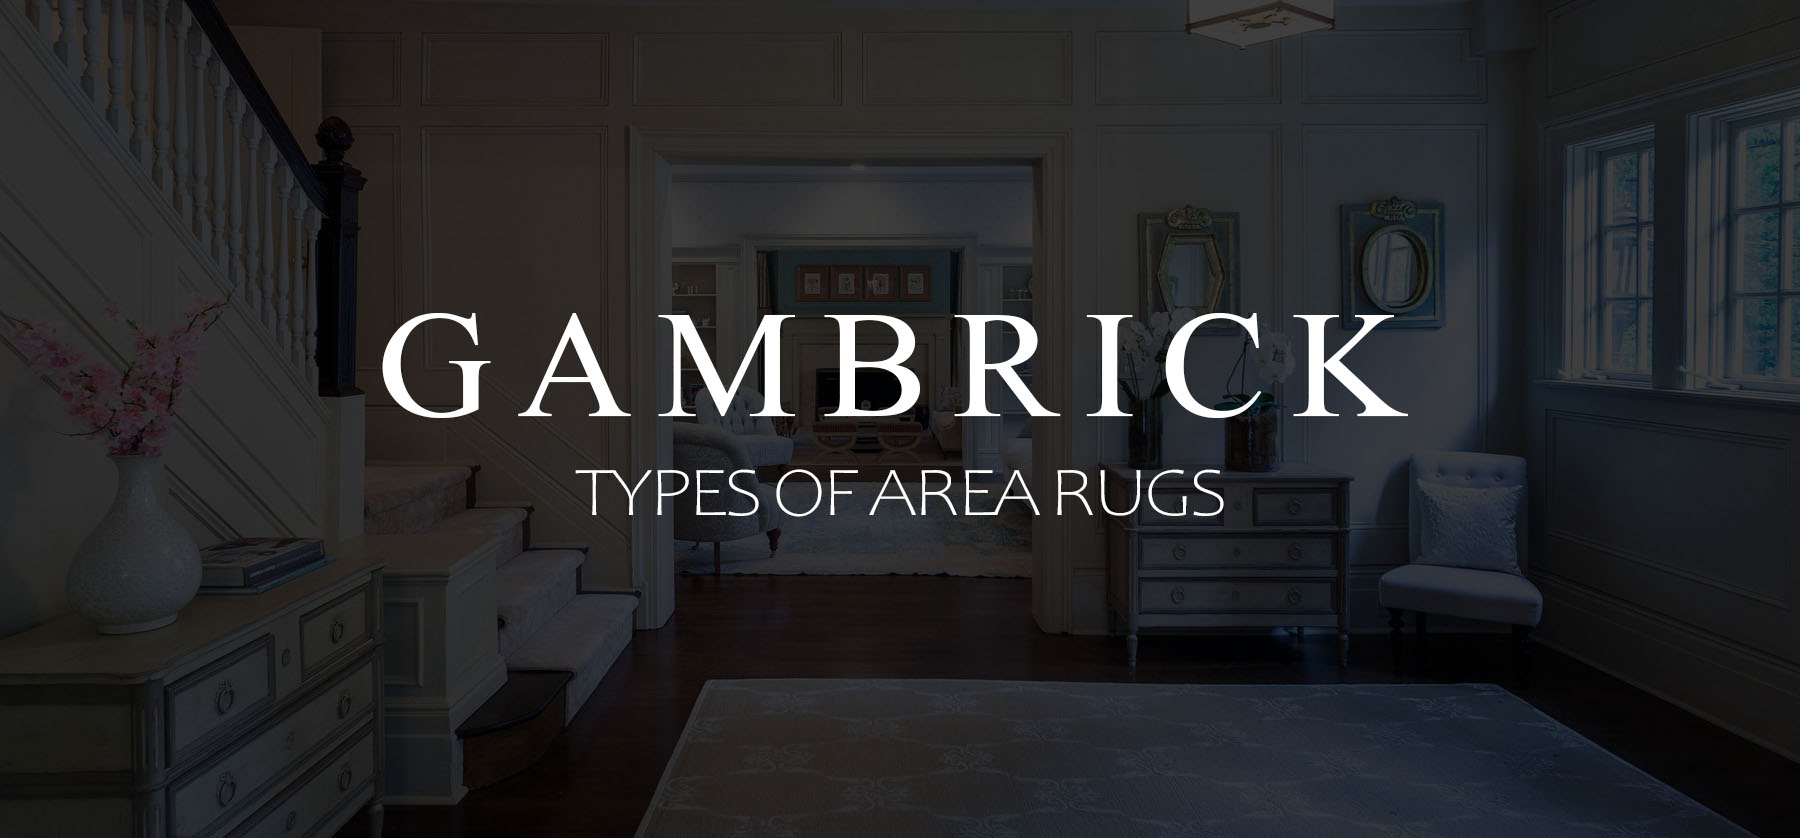 type of area rugs banner picture